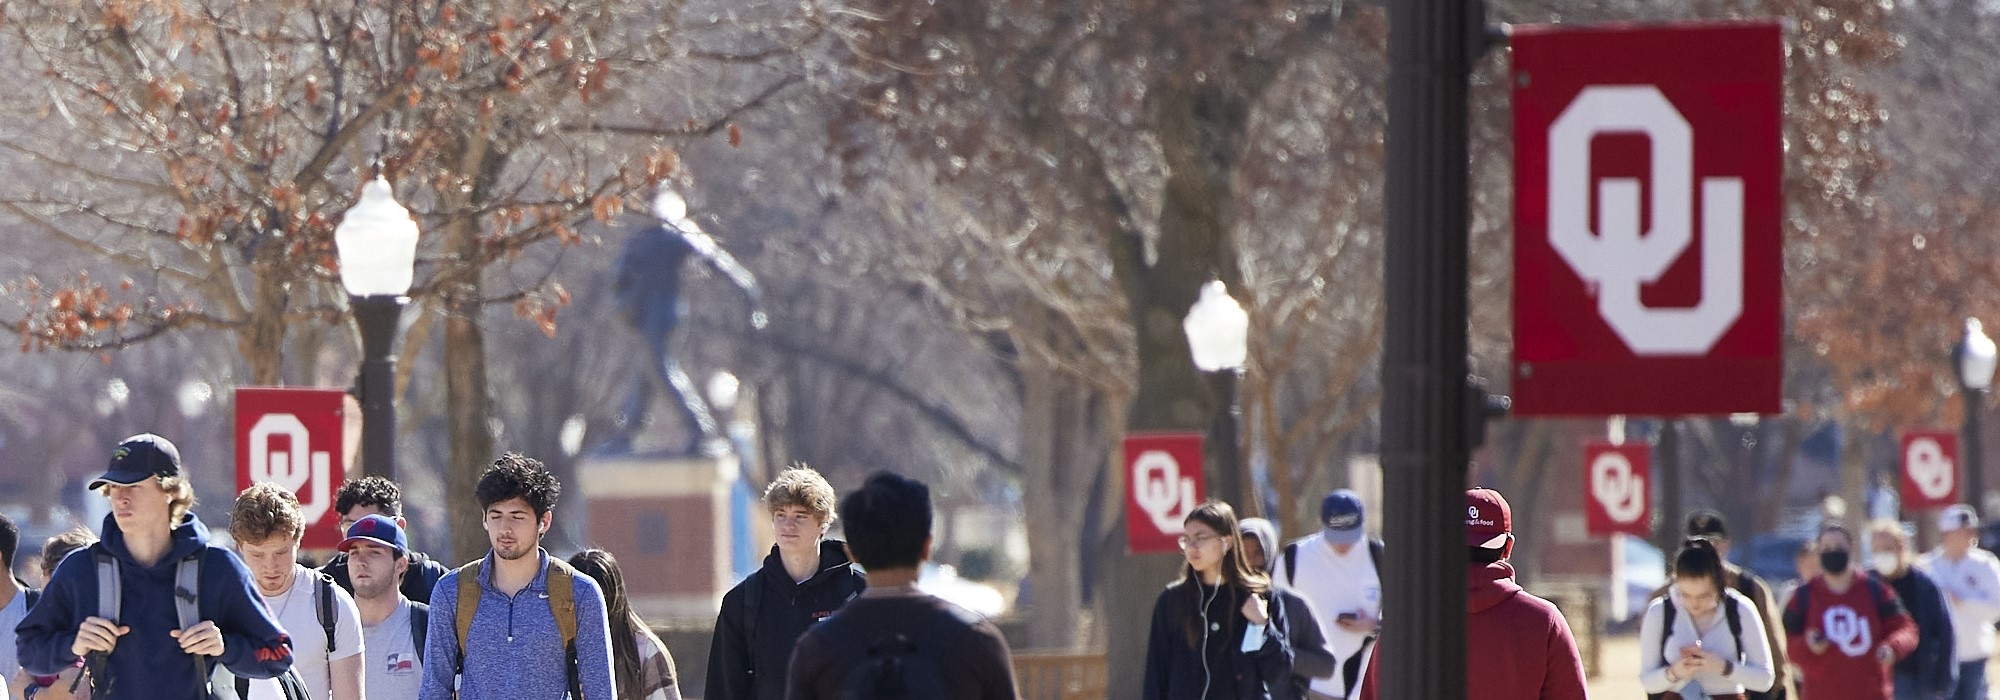 Students walking in the south oval during a sunny winter day on OU's campus in Norman, OK